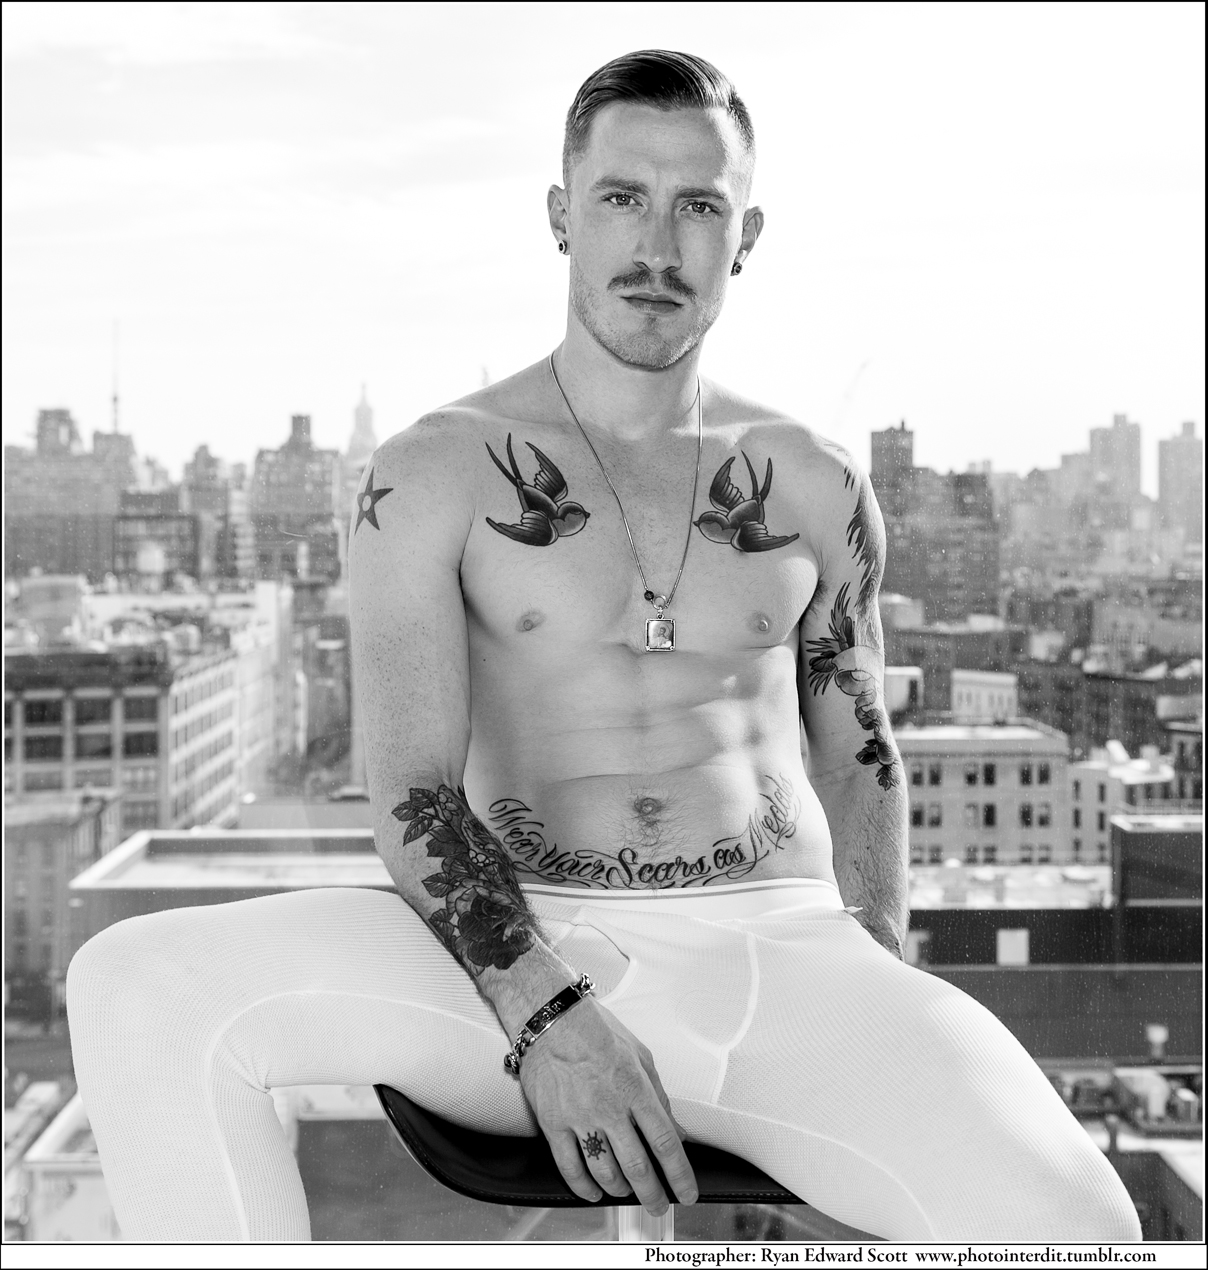 Retired gay porn star Kennedy Carter poses naked for photographer Ryan Edward Scott in an editorial for The Summer Diary Project.